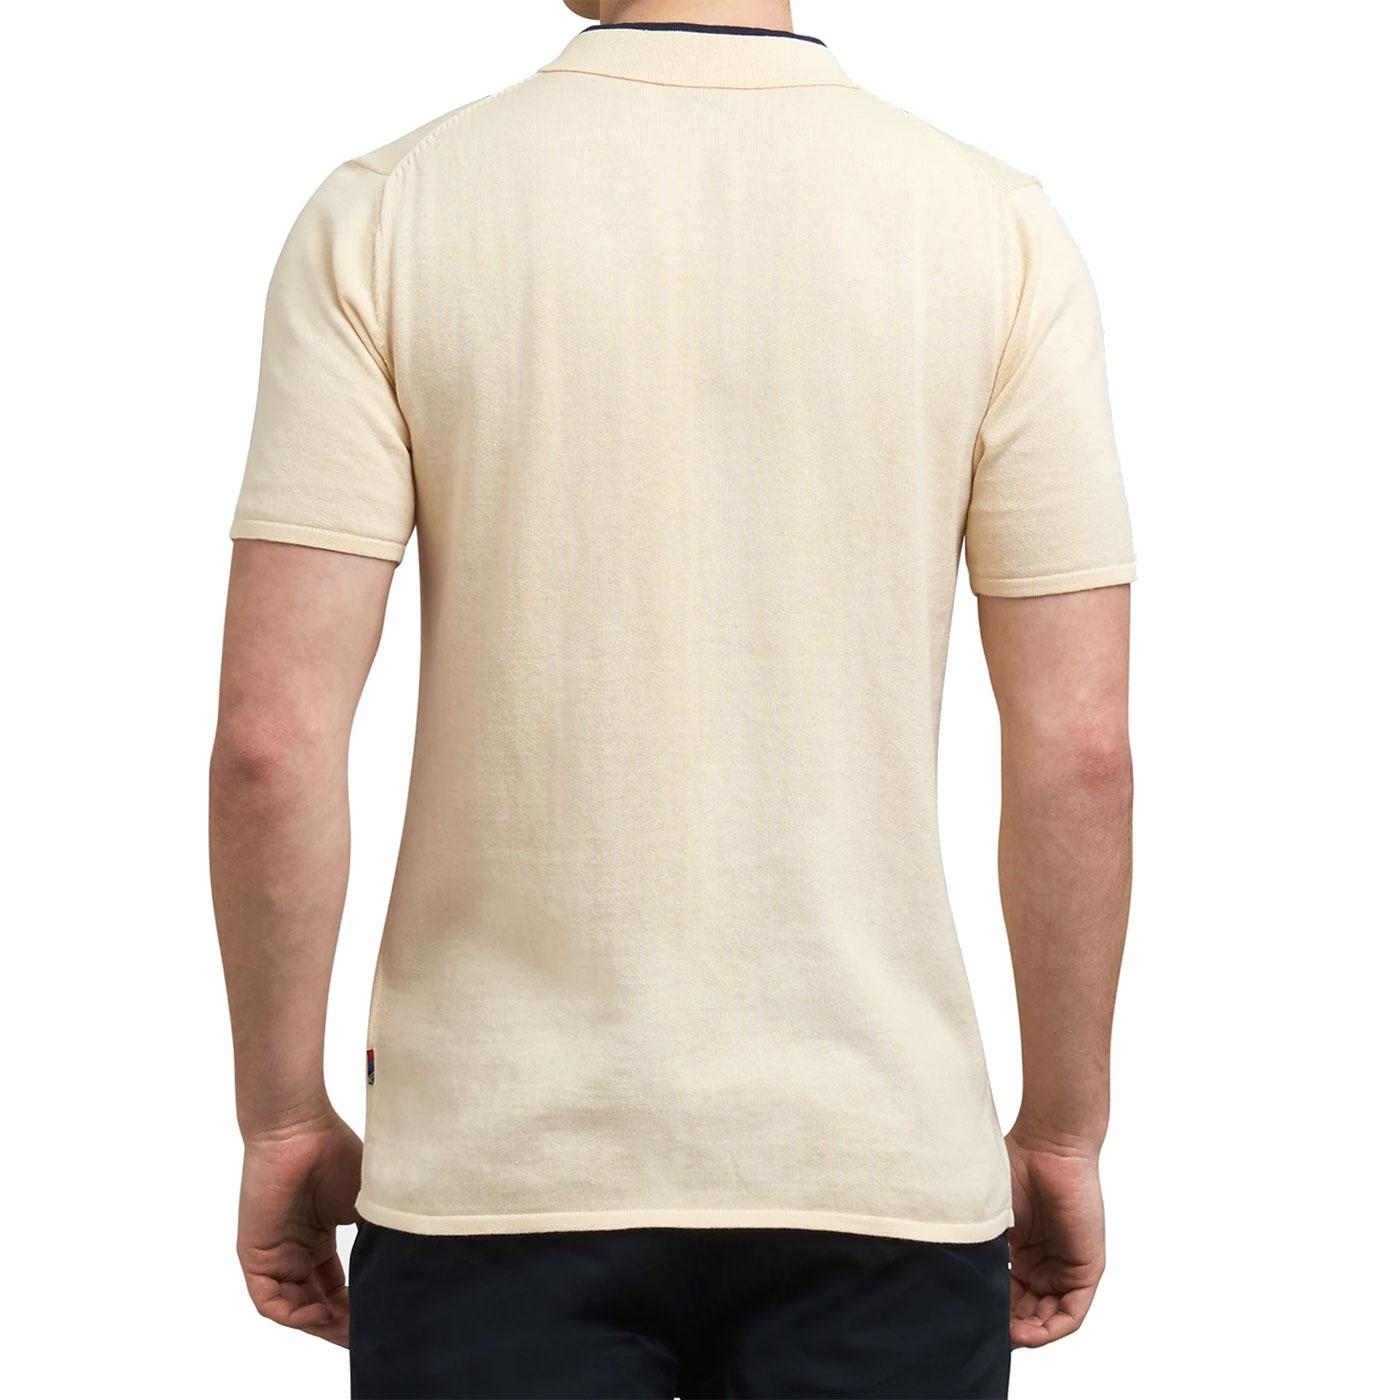 Vintage 80s Cream Knitted Polo T-shirt